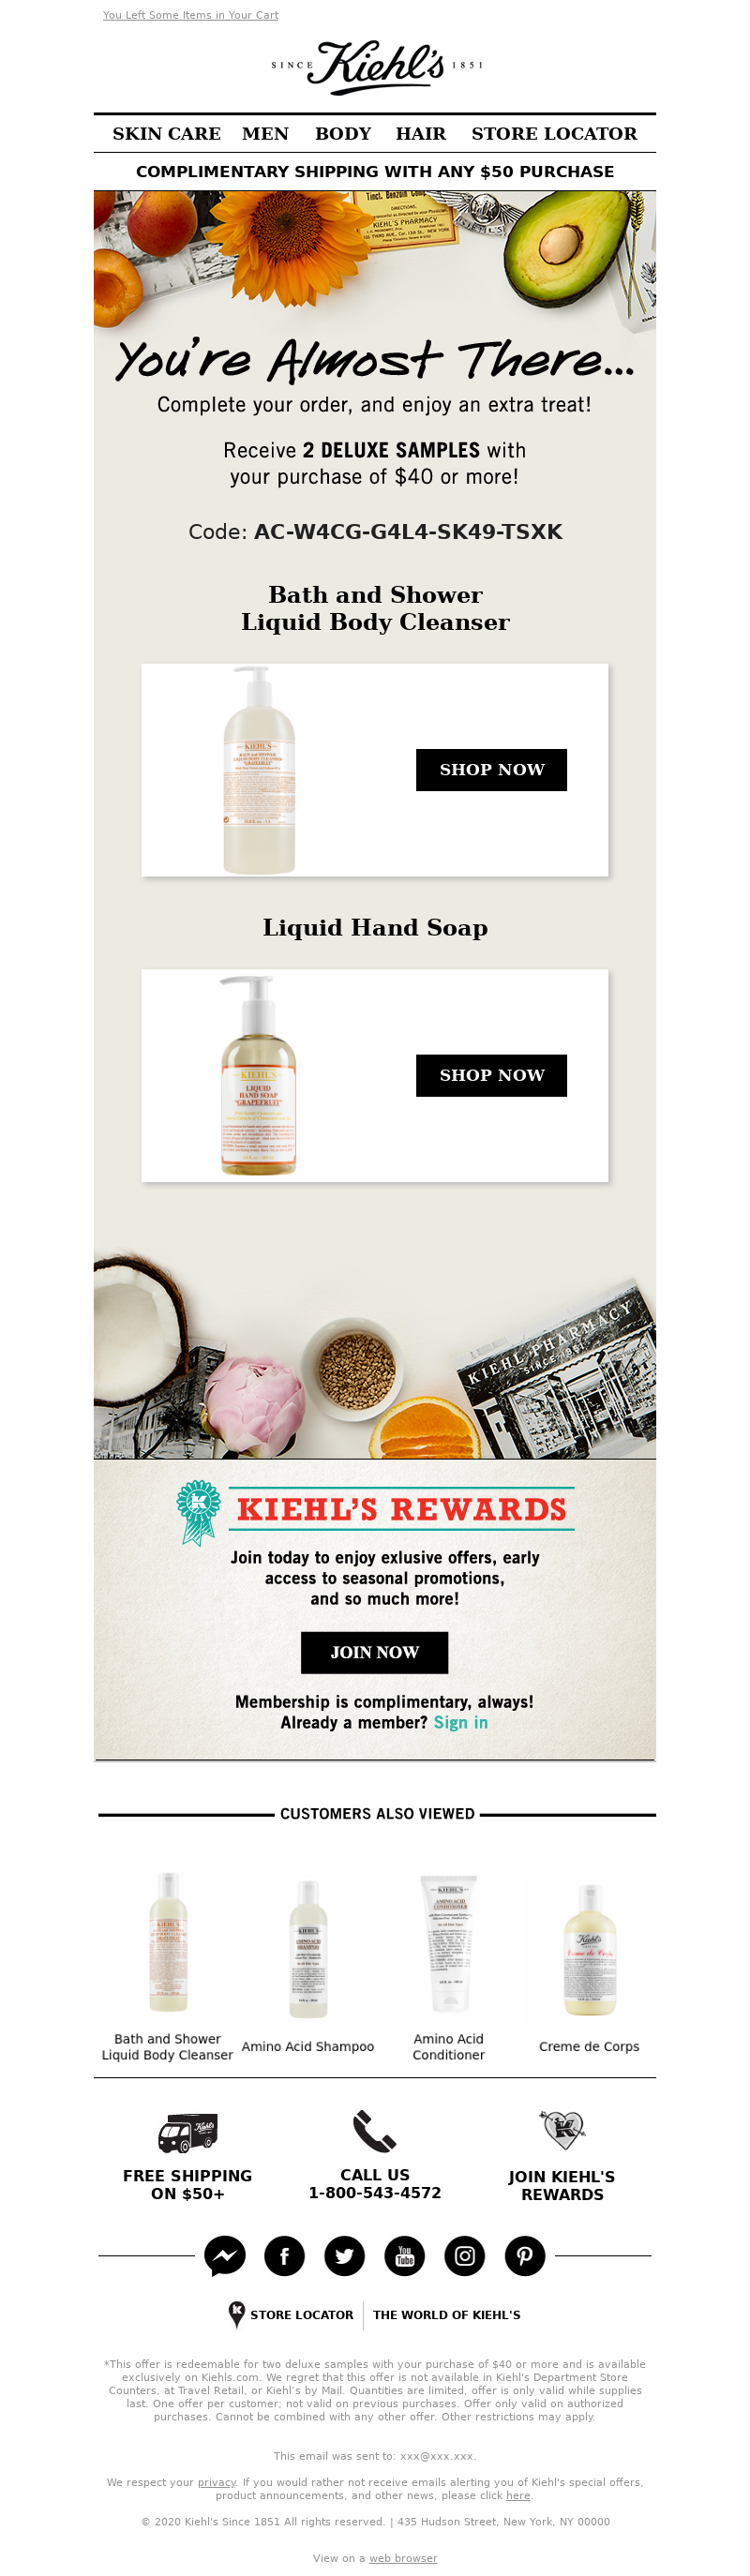 Kiehl's USA - 2 Deluxe Samples - Your Choice!